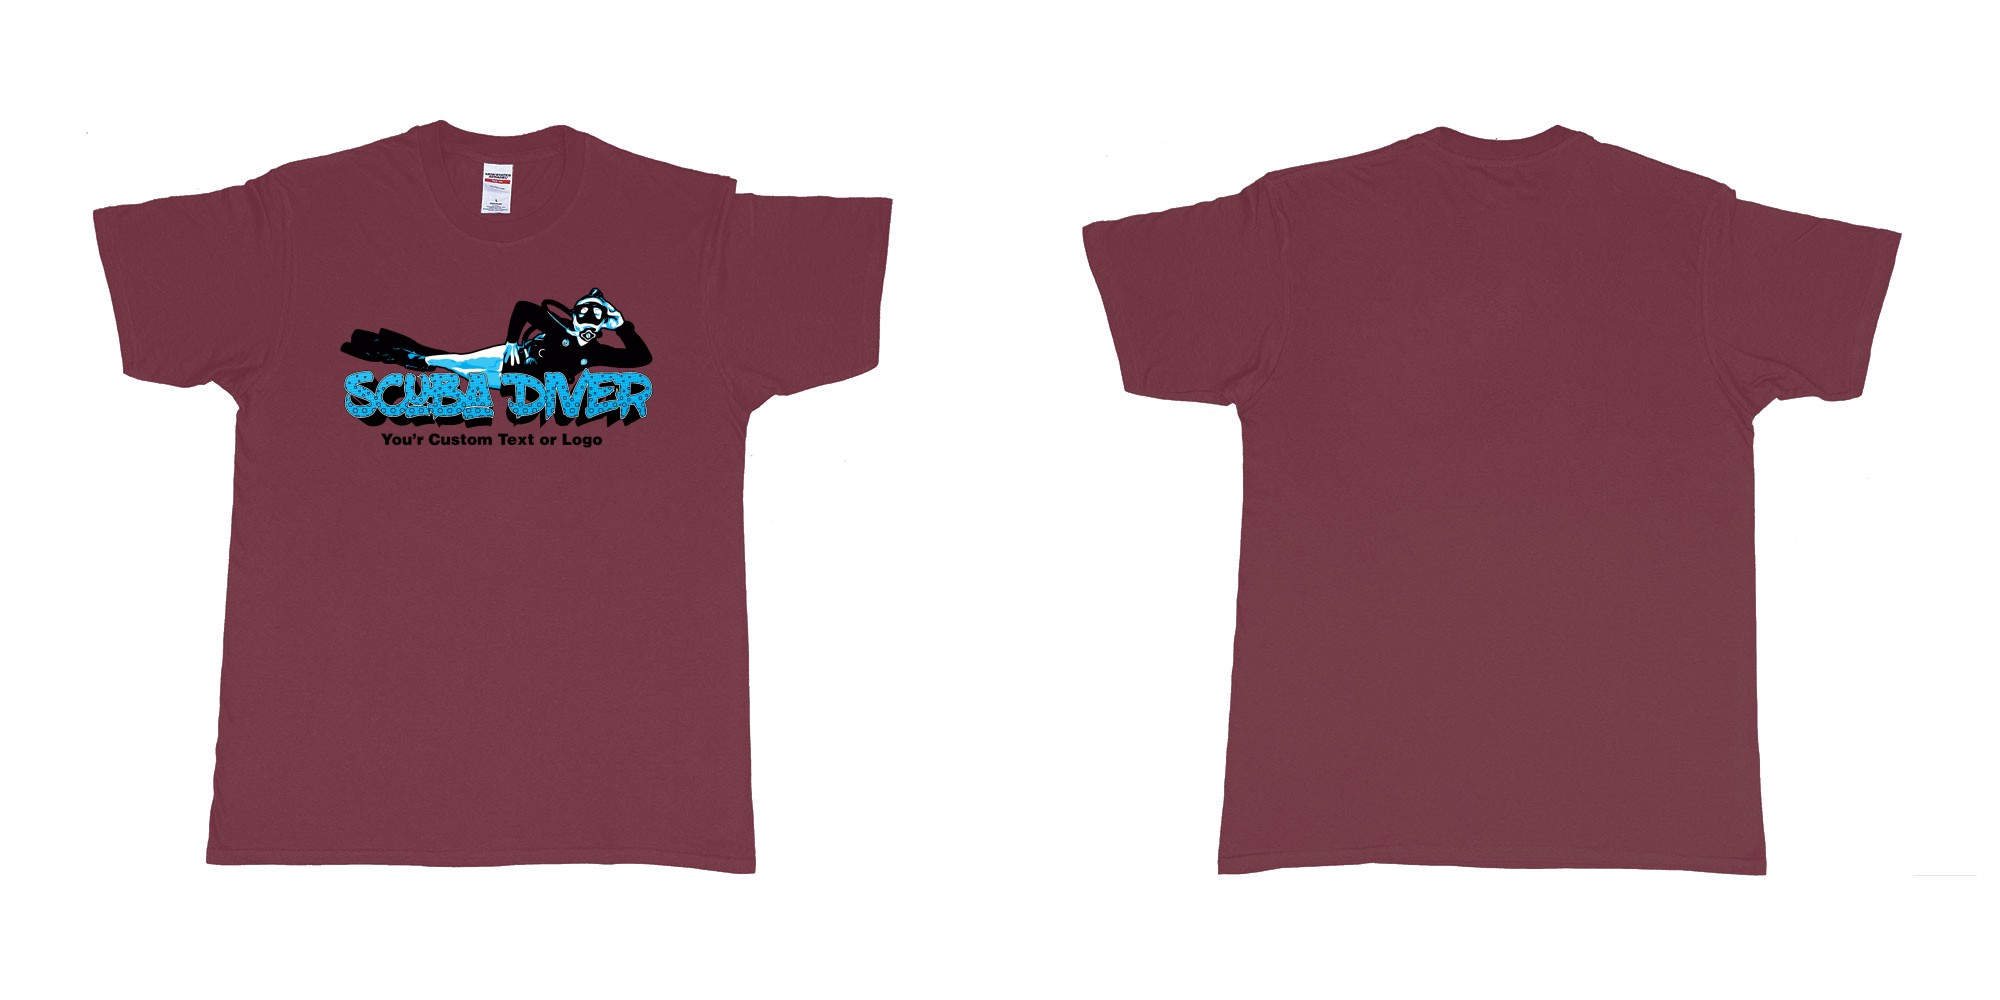 Custom tshirt design relaxed scuba diver in fabric color marron choice your own text made in Bali by The Pirate Way